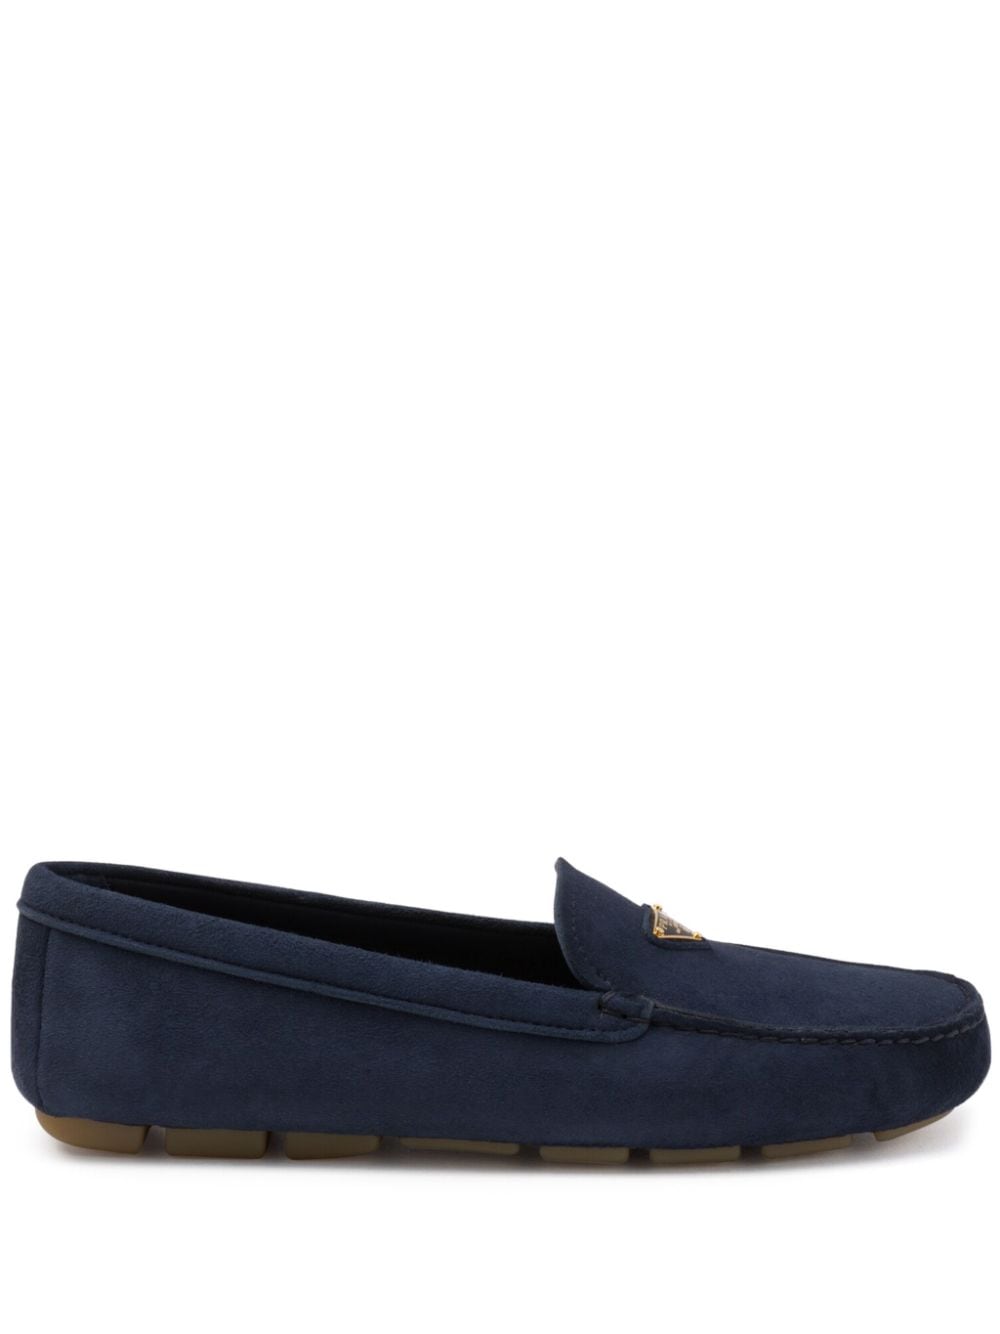 Image 1 of Prada triangle-logo suede driving loafers